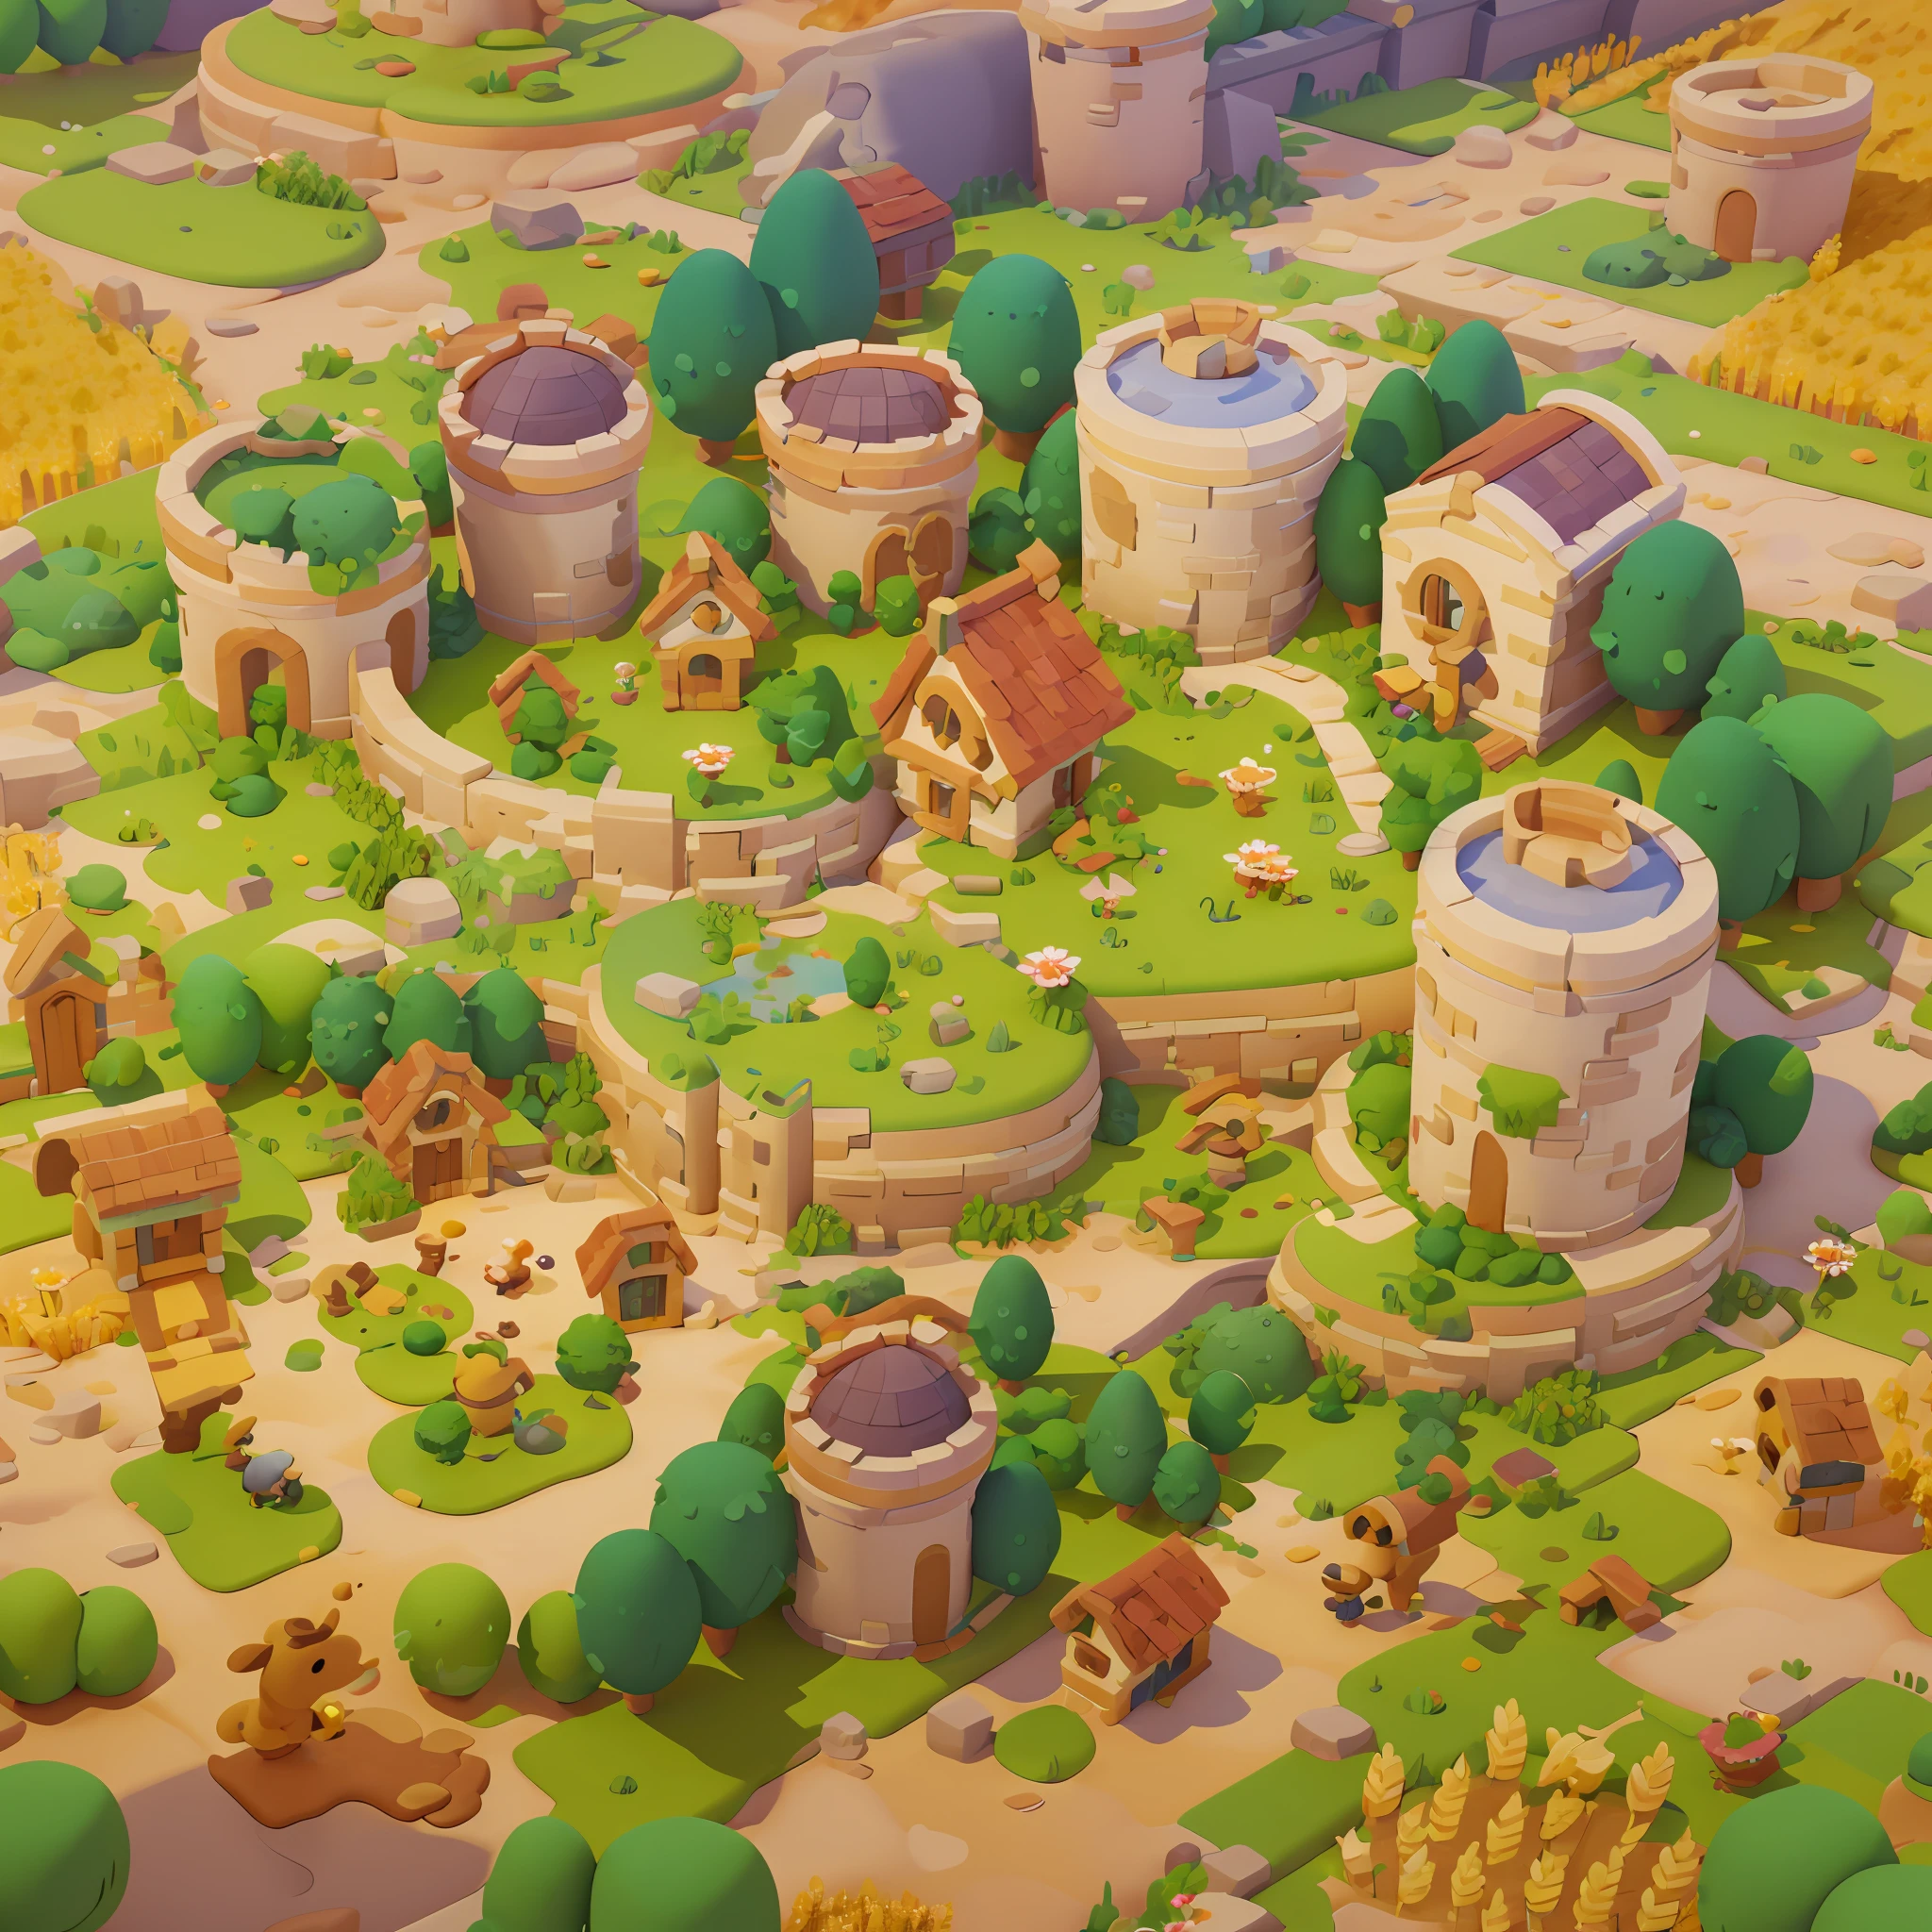 Game architecture design, cartoon, farm, castle, rampart, stone, brick, grass, river, flowers, vegetables, wheat, trees, animals, casual play style, 3d, blender, masterpiece, super detail, best quality